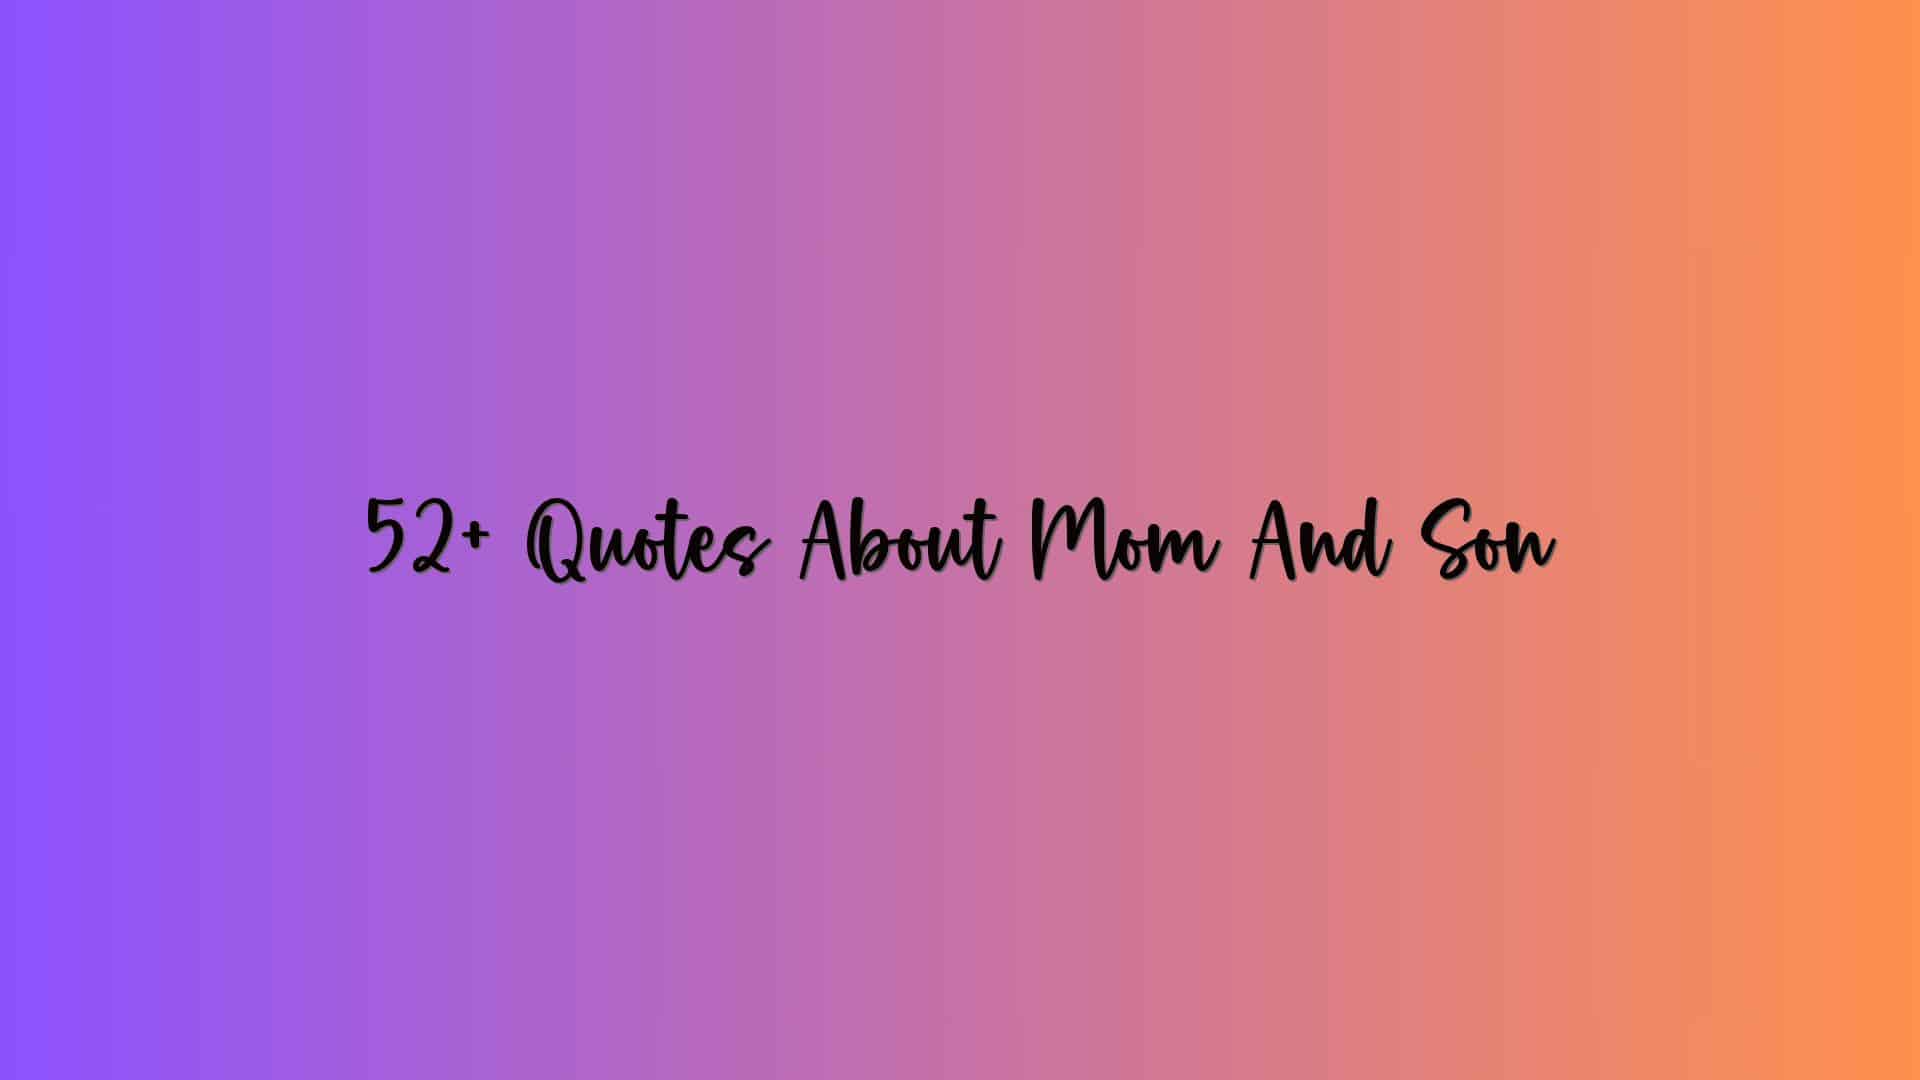 52+ Quotes About Mom And Son